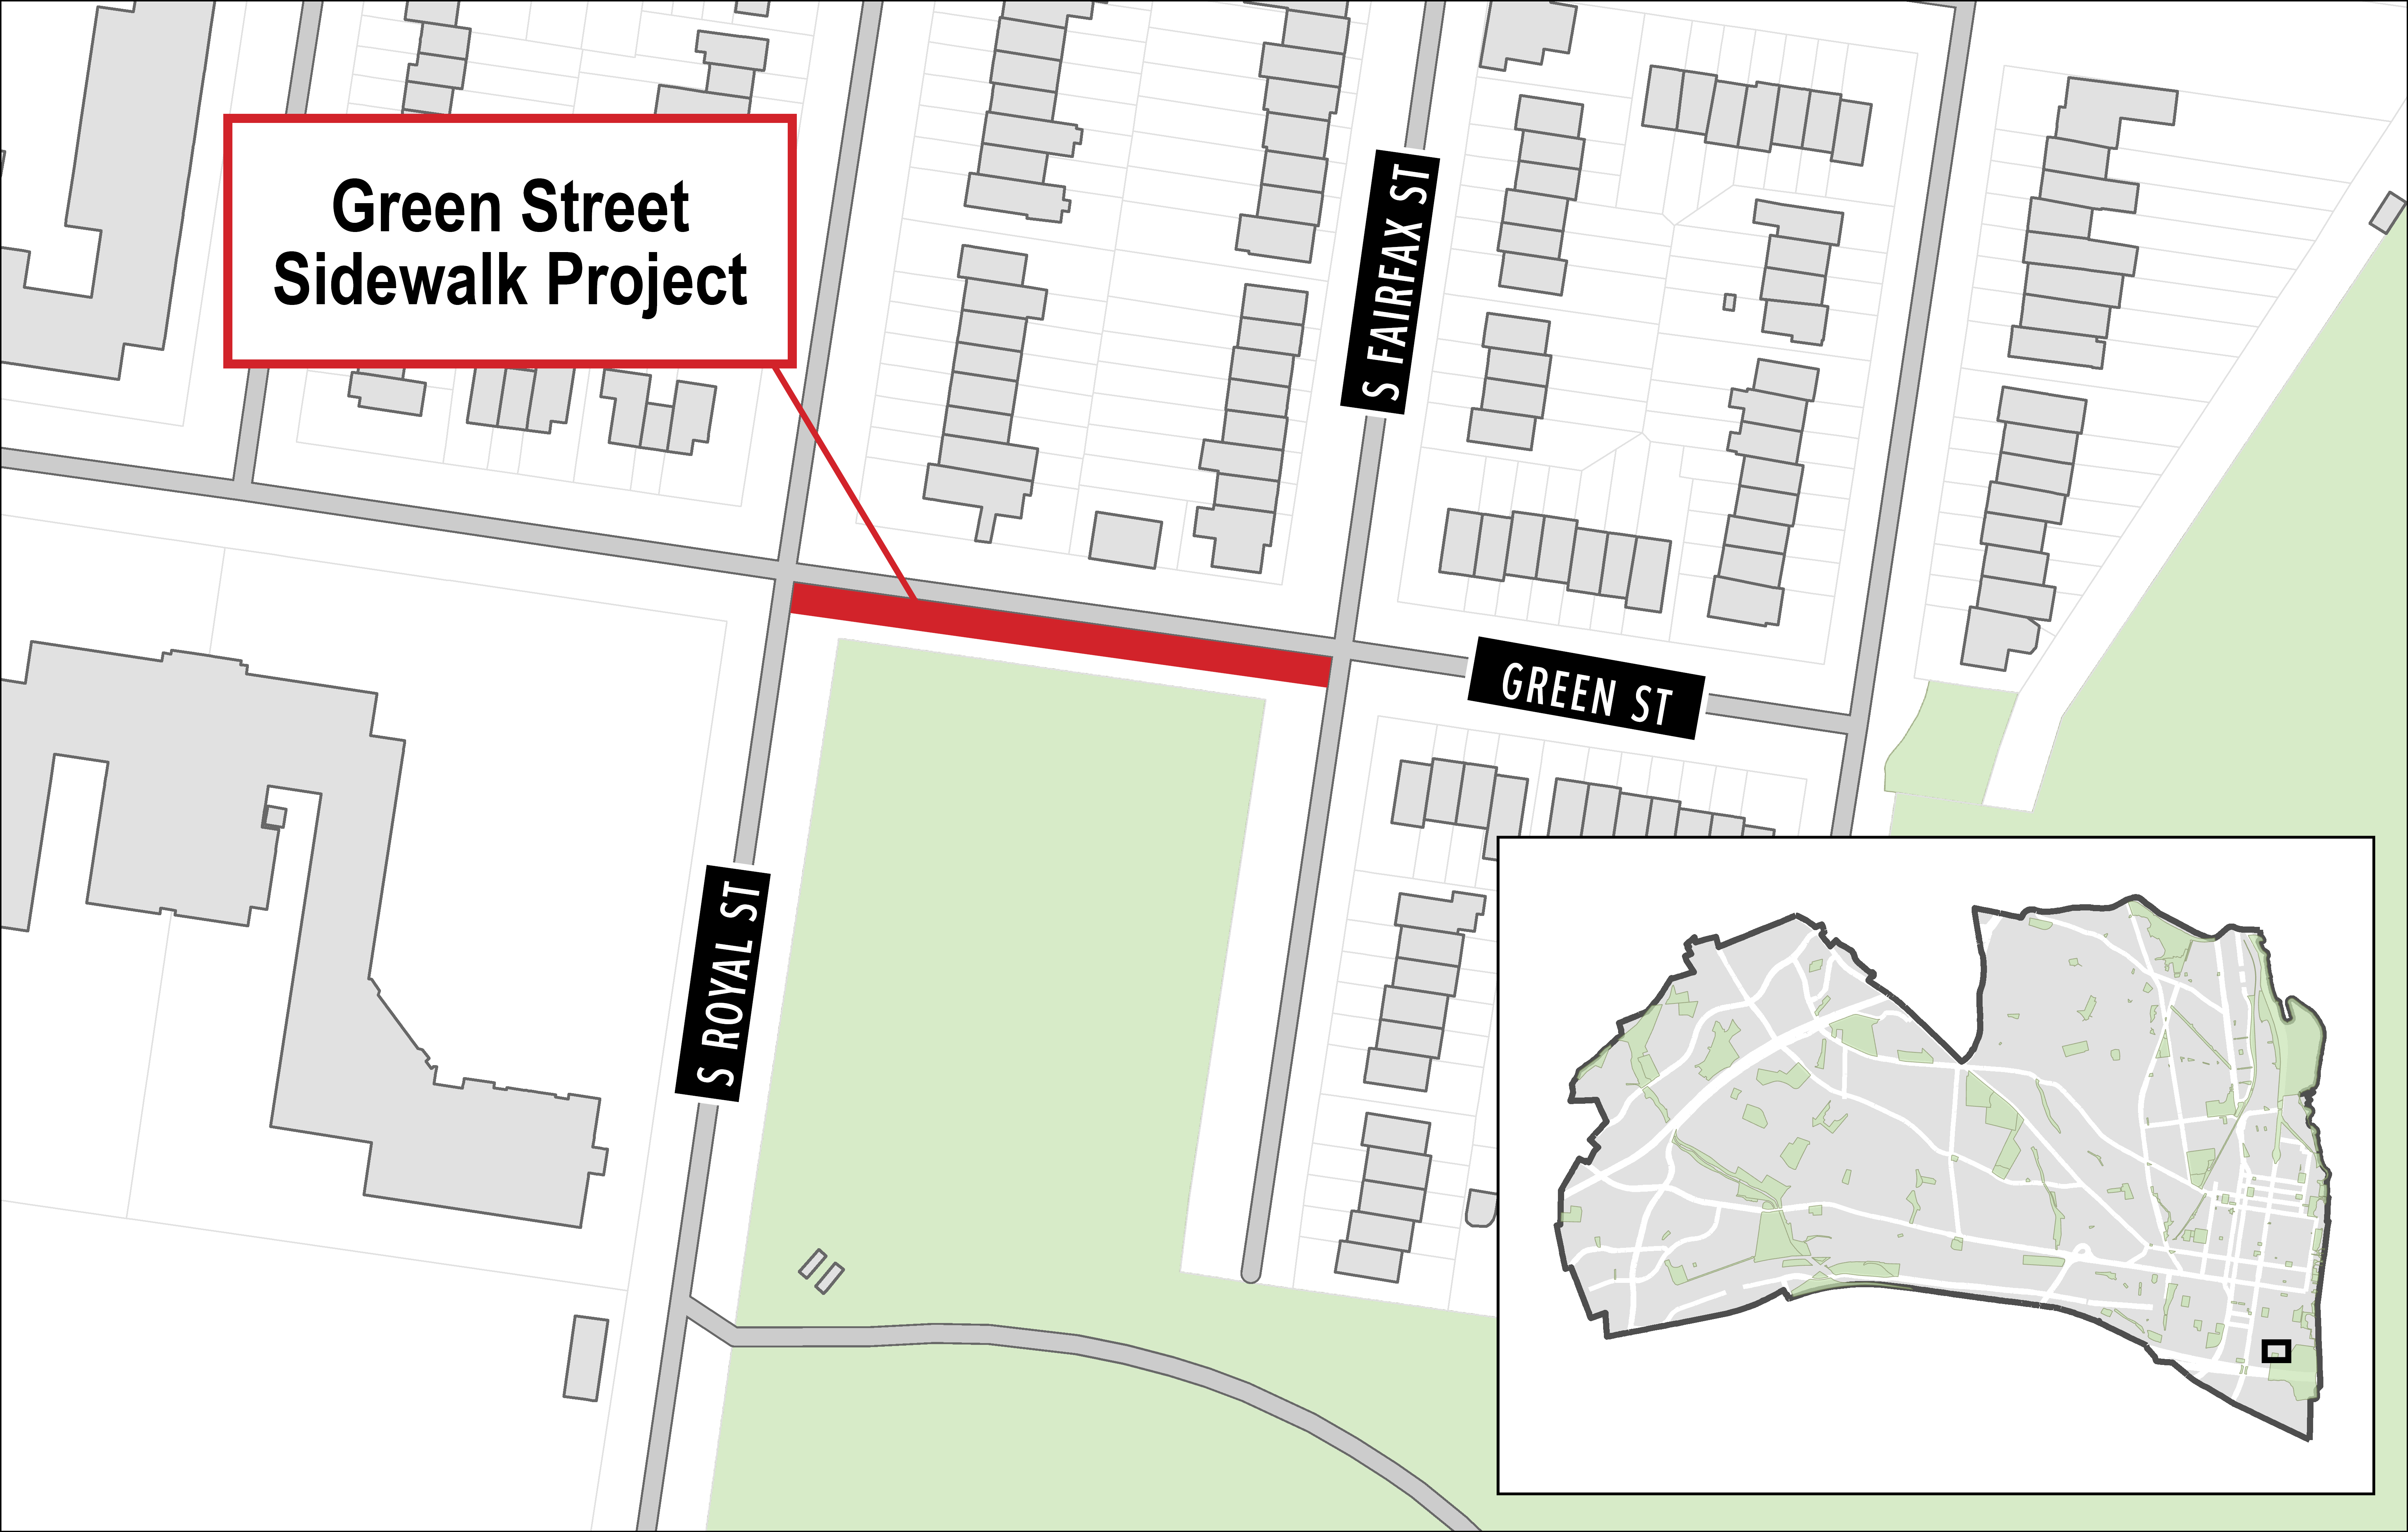 Map showing the location of the Green Street Sidewalk Project and how it relates to nearby streets, the community garden, and other points of interest.